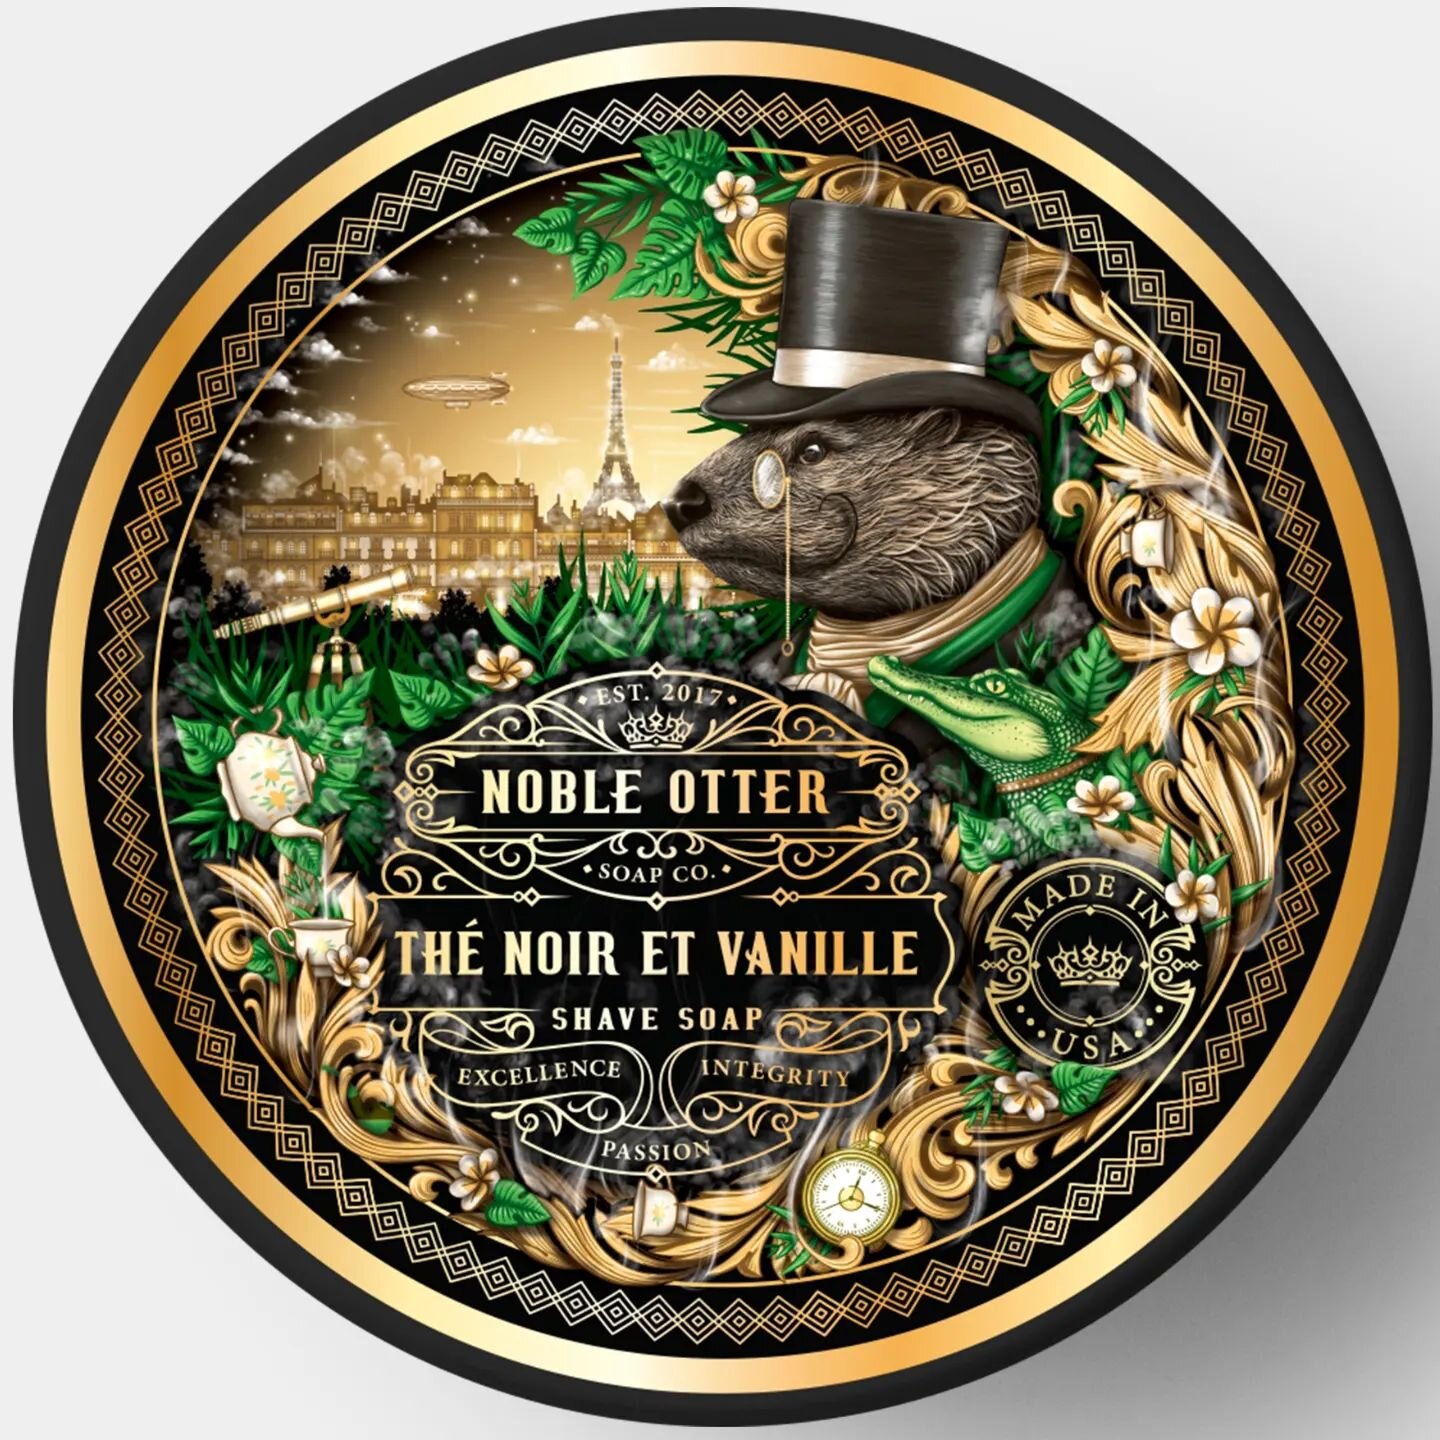 First redesign of an old label for @noble_otter. Th&eacute; Noir Et Vanille was the first label we did. I made a suggestion about the direction when we first met, but Cody was reluctant. Once he saw it, he began to believe this direction had potentia